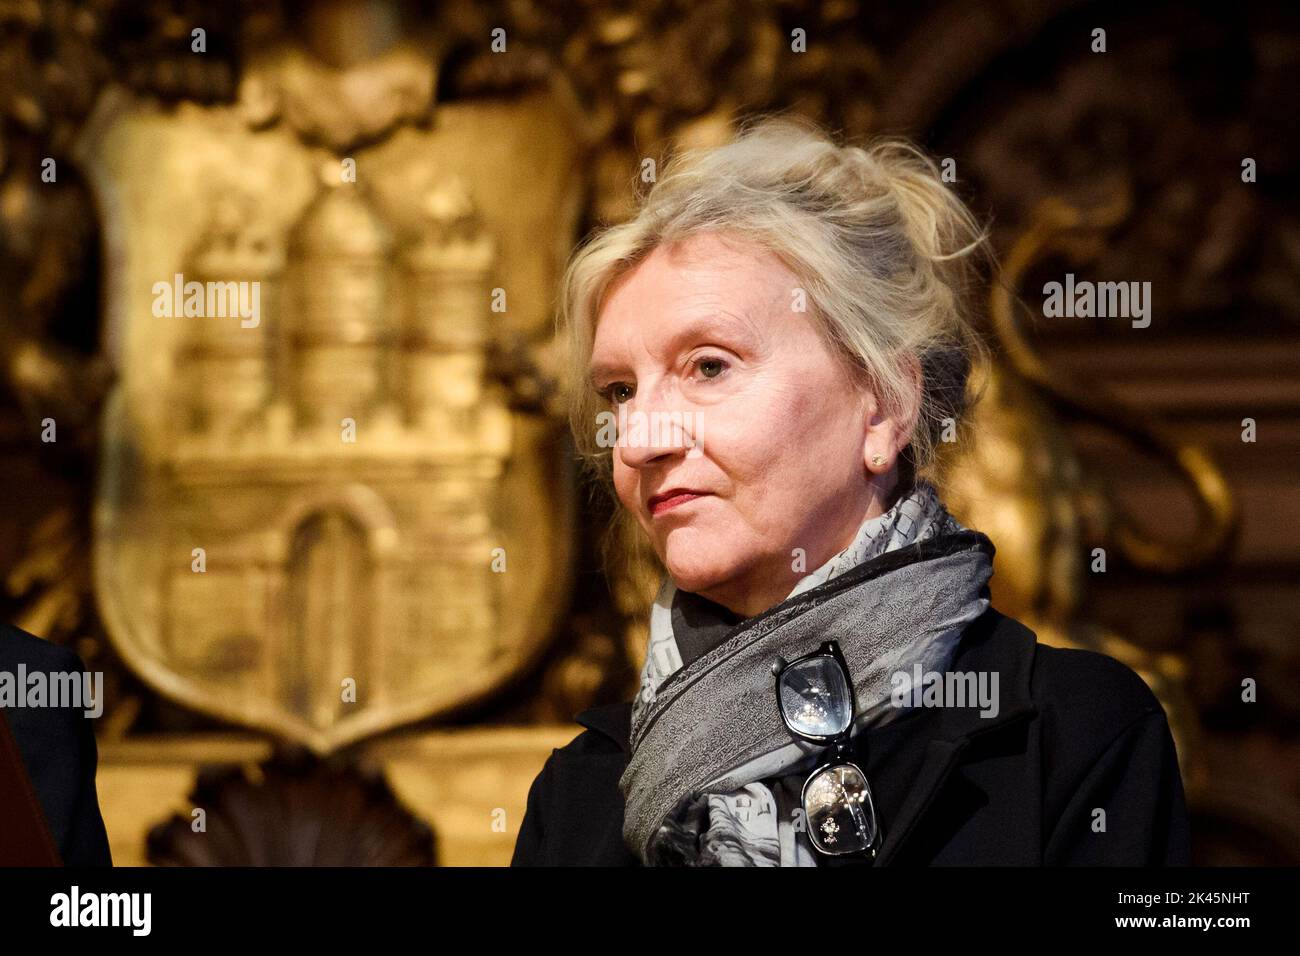 Hamburg, Germany. 30th Sep, 2022. Elizabeth Strout, writer and prize winner, attends the award ceremony for the Siegfried Lenz Prize of the foundation of the same name in the Great Ballroom of Hamburg City Hall. U.S. writer Strout has received the Siegfried Lenz Prize, which is endowed with 50,000 euros. Credit: Gregor Fischer/dpa/Alamy Live News Stock Photo